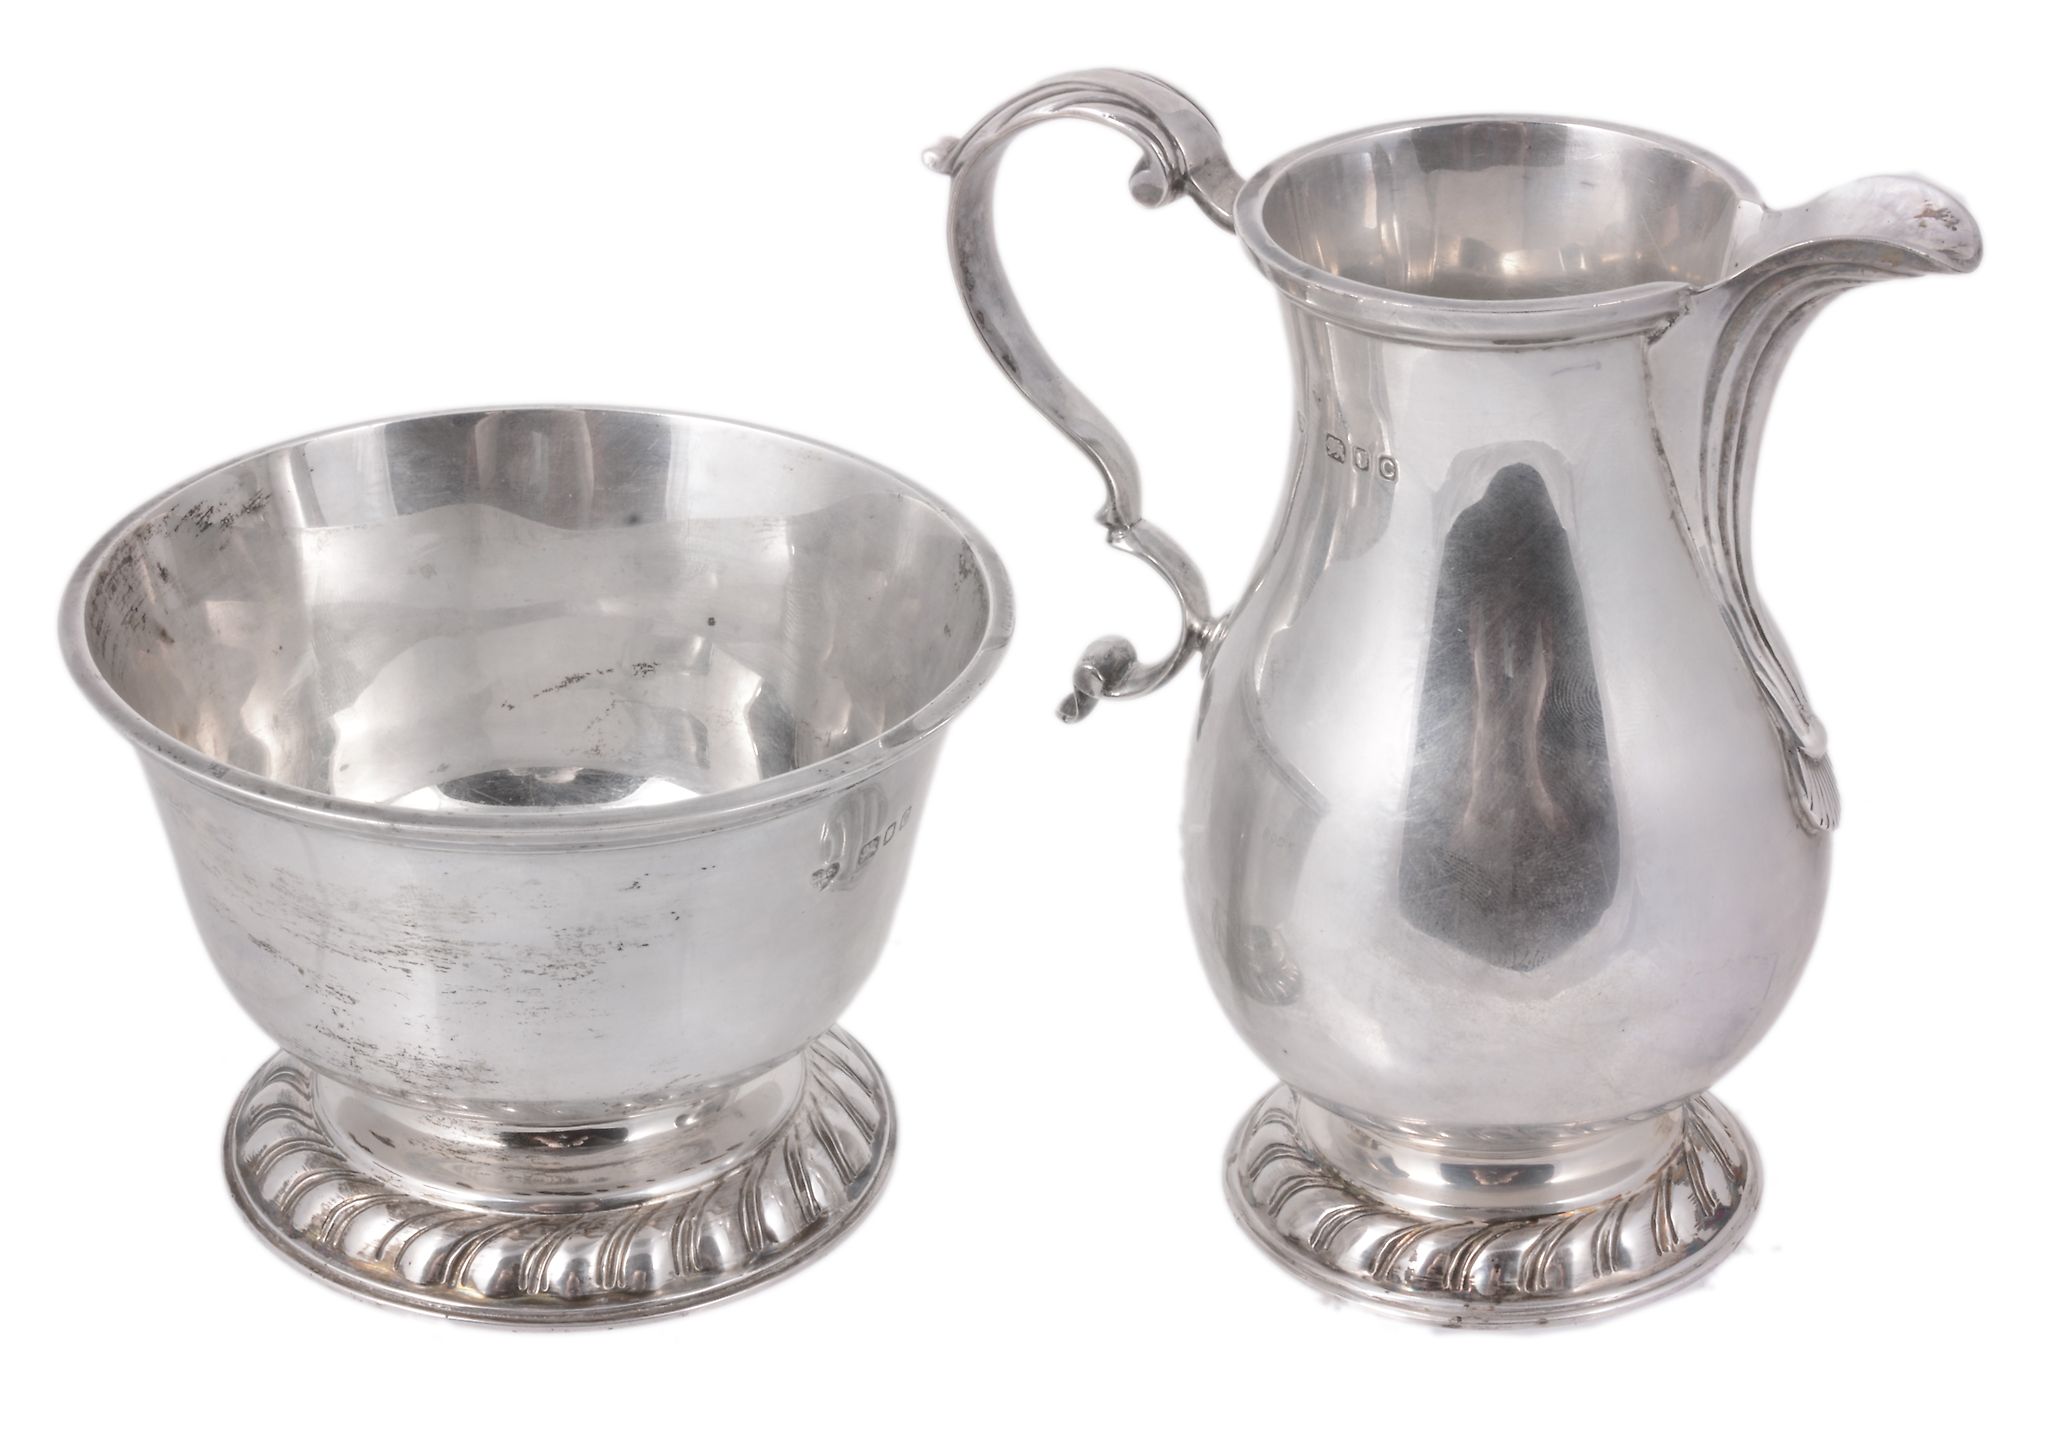 A silver baluster jug and a matching bowl by Goldsmiths & Silversmiths Co. Ltd A silver baluster jug